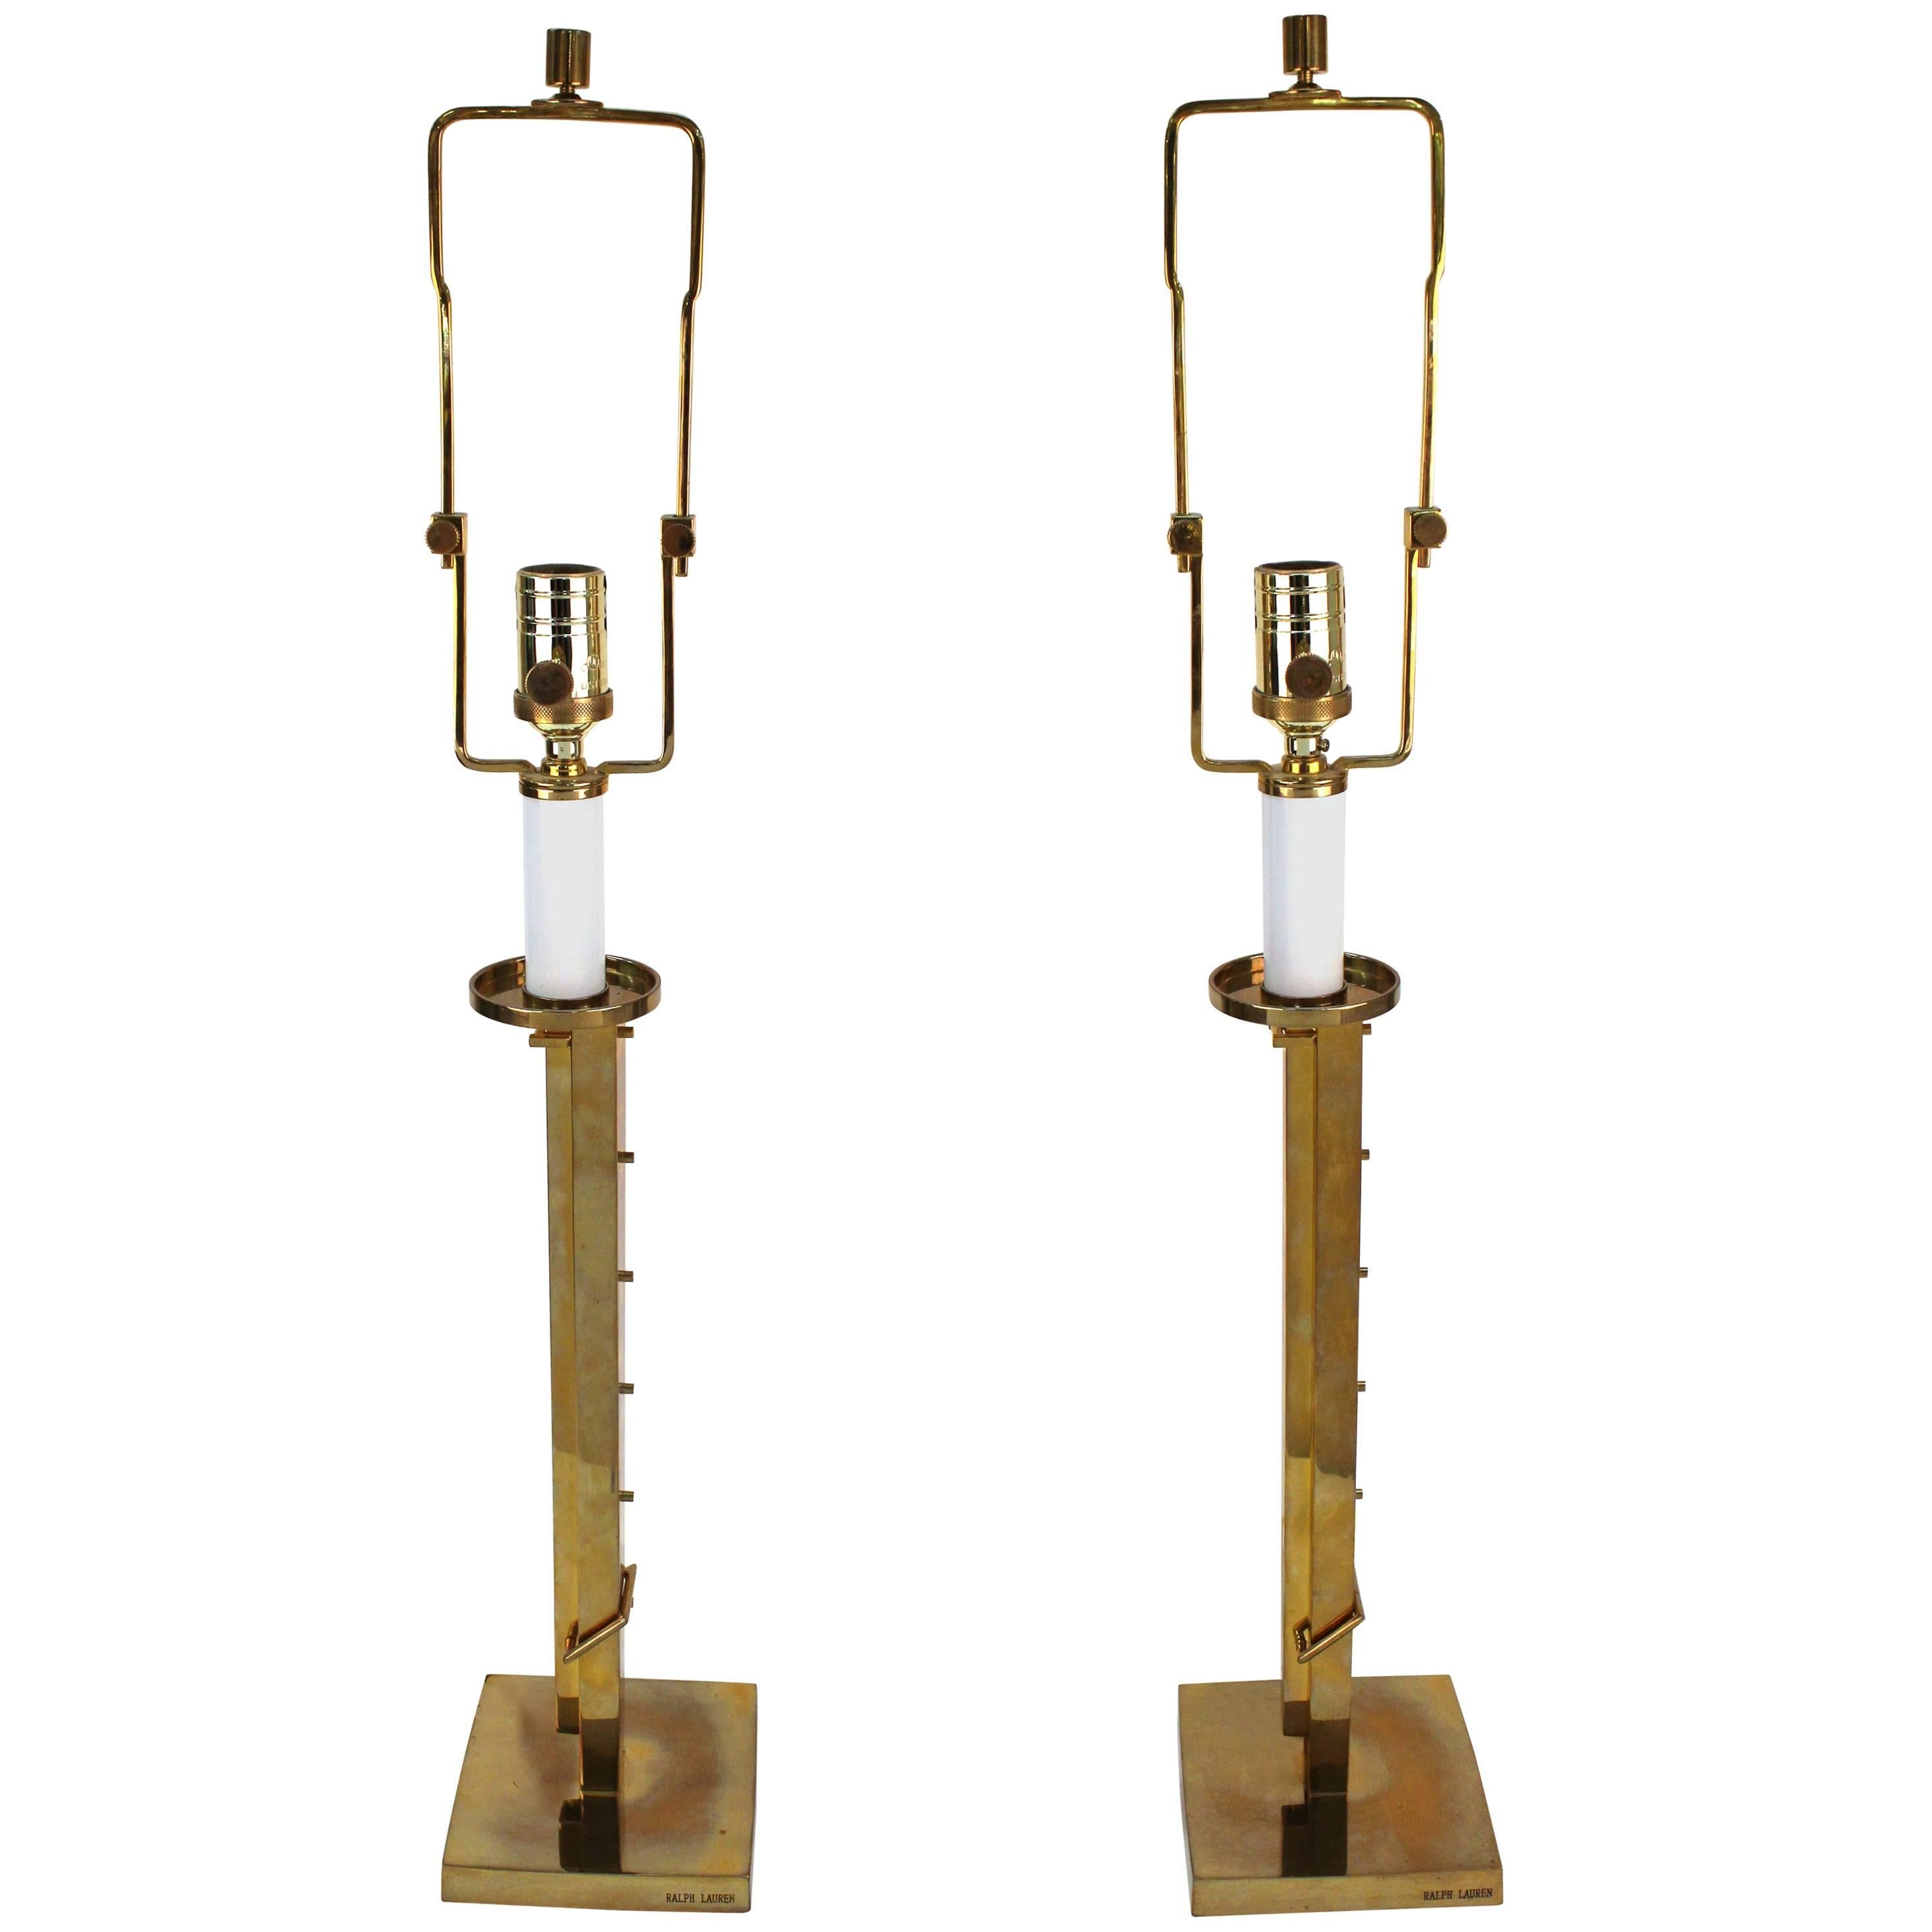 Pair of Ralph Lauren Polished Brass Table Lamps